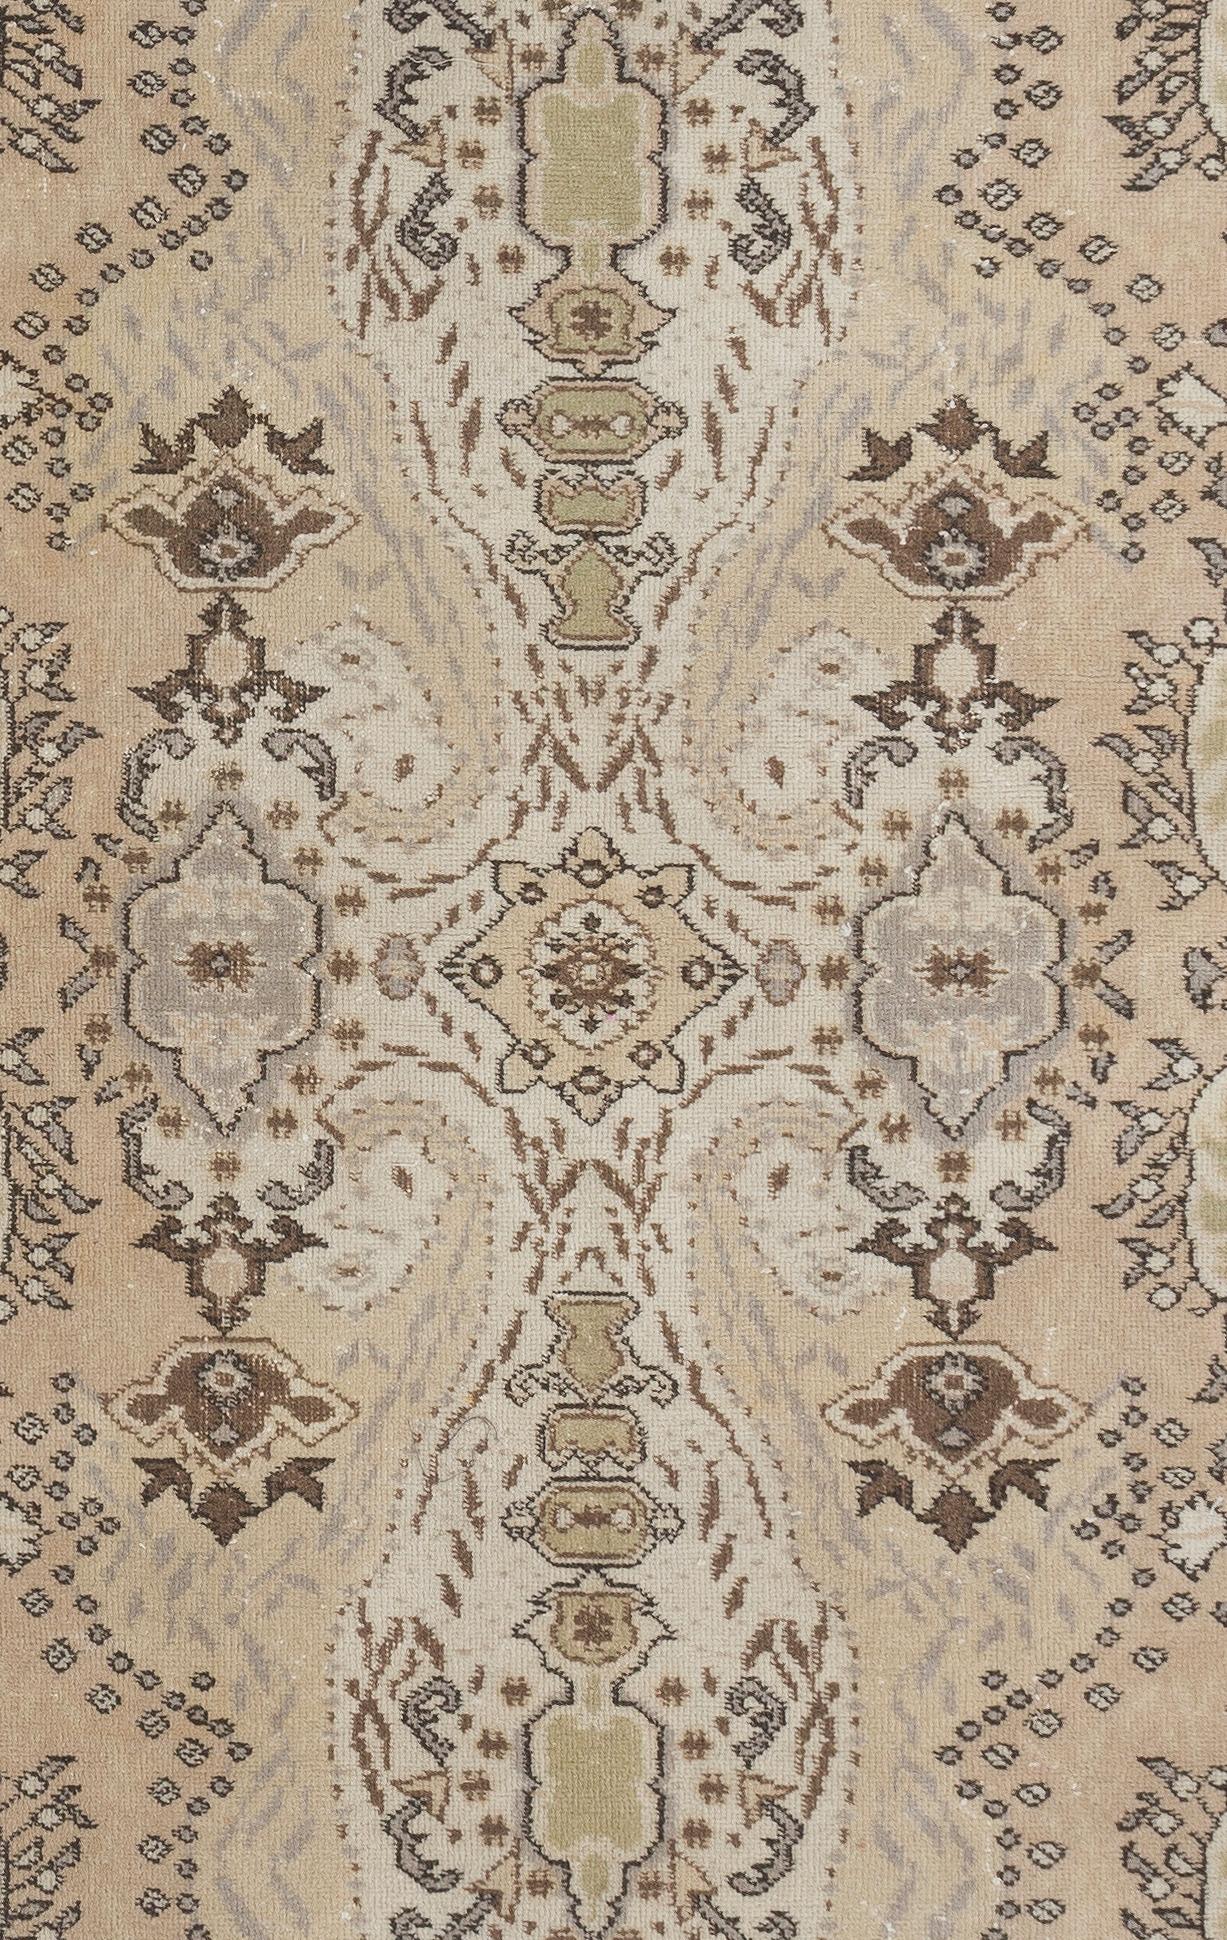 Oushak 4x7.2 Ft Vintage Hand-Knotted Central Anatolian Wool Accent Rug in Beige For Sale